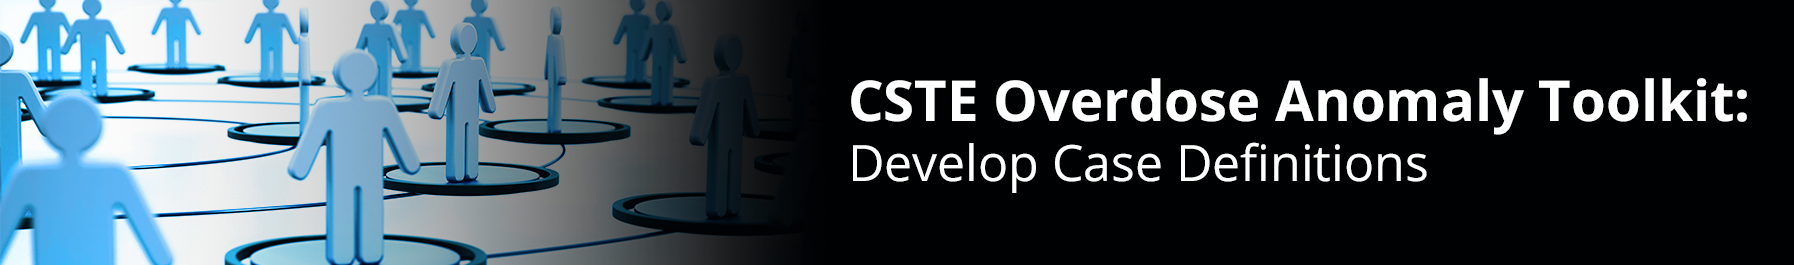 CSTE Overdose Anomaly Toolkit: Develop Case Definitions